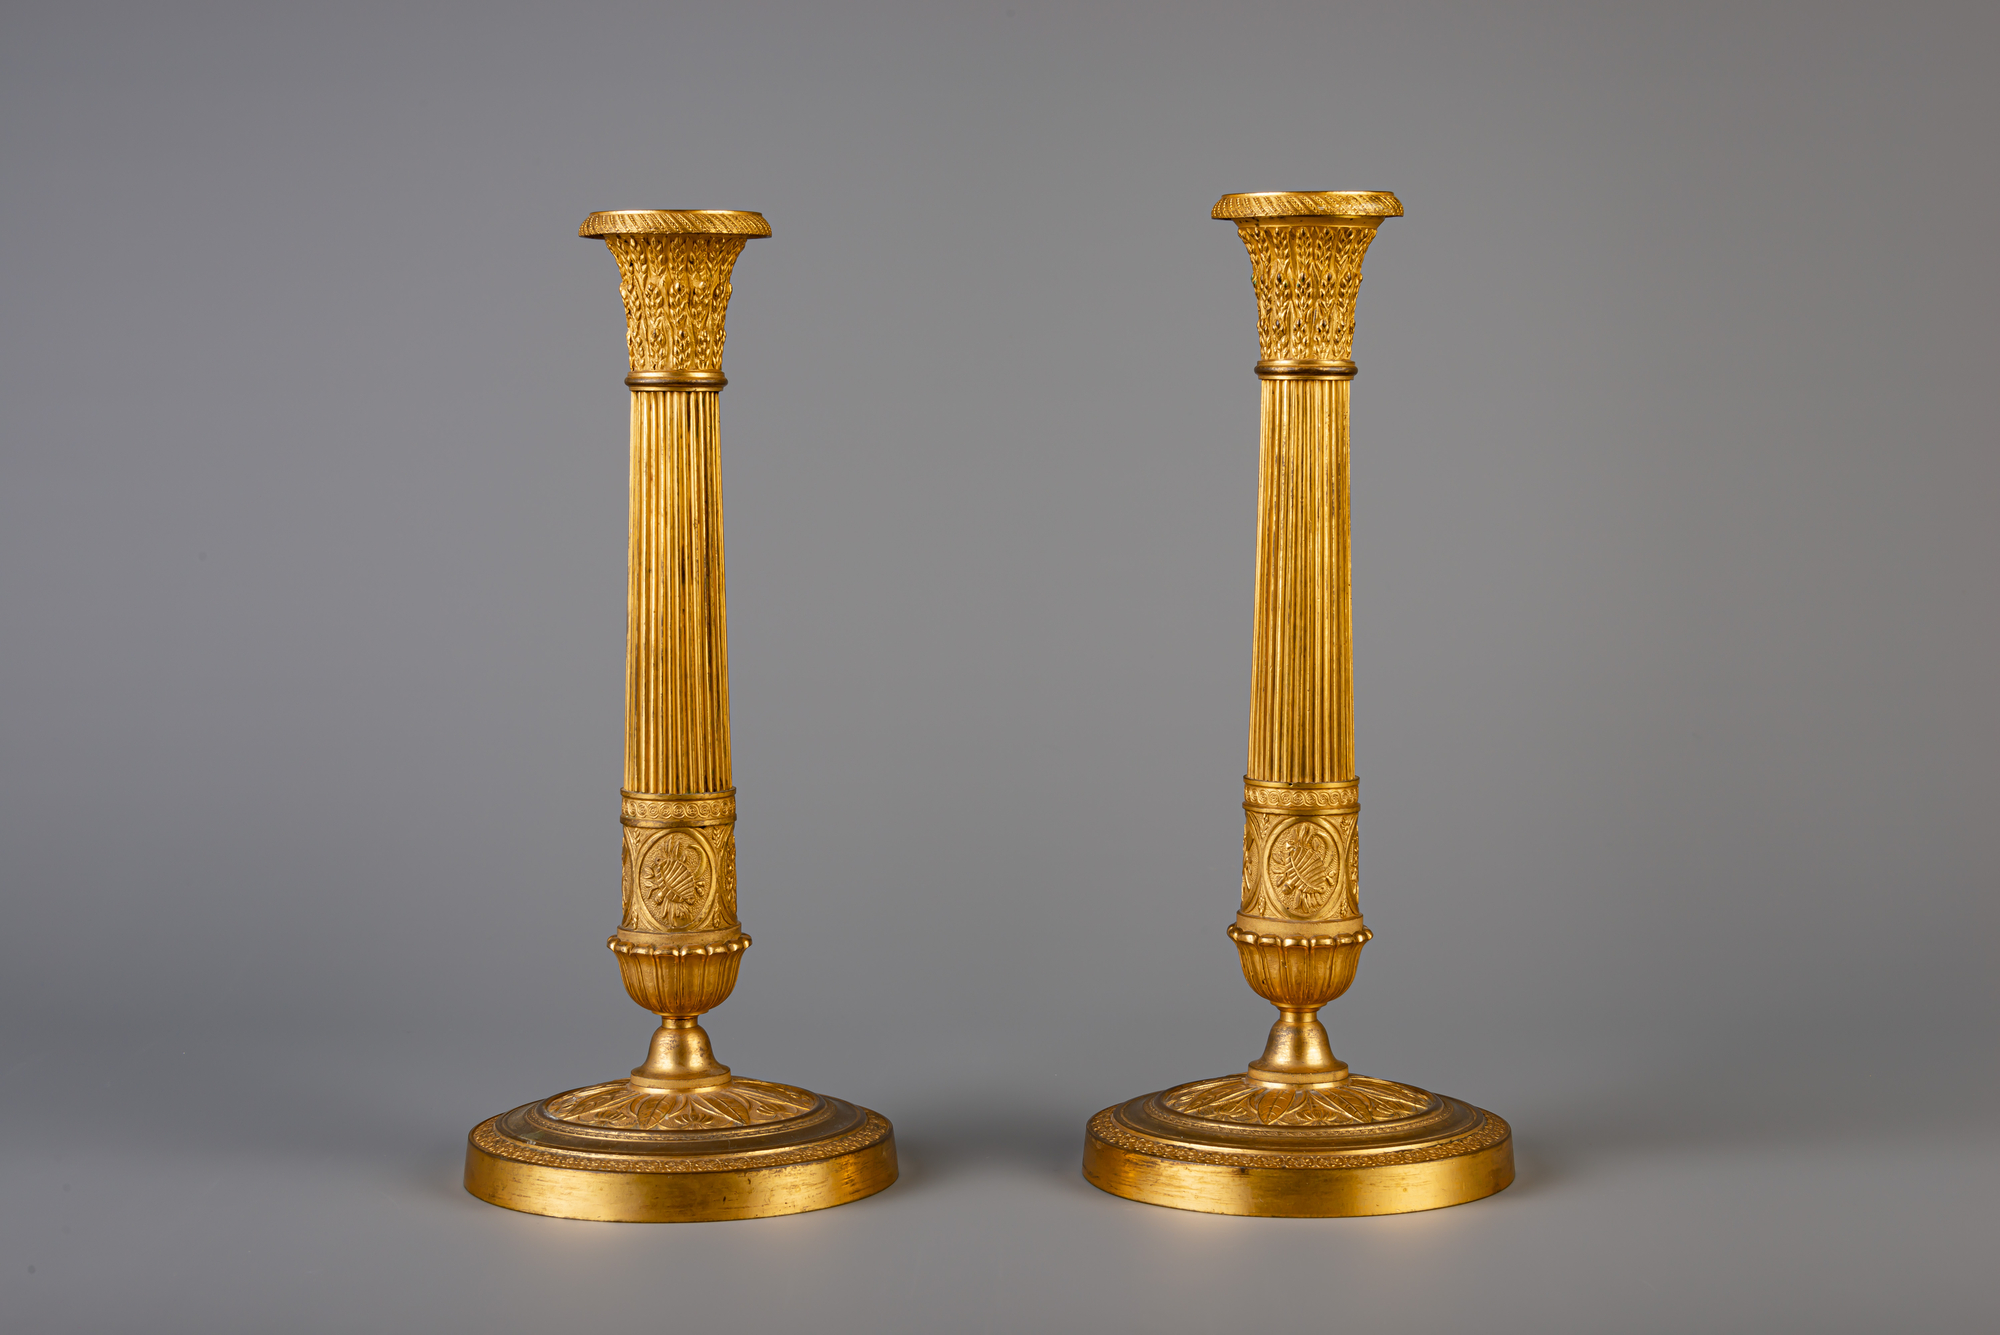 A pair of French Neoclassical gilt bronze candlesticks, 19th C. - Image 4 of 7